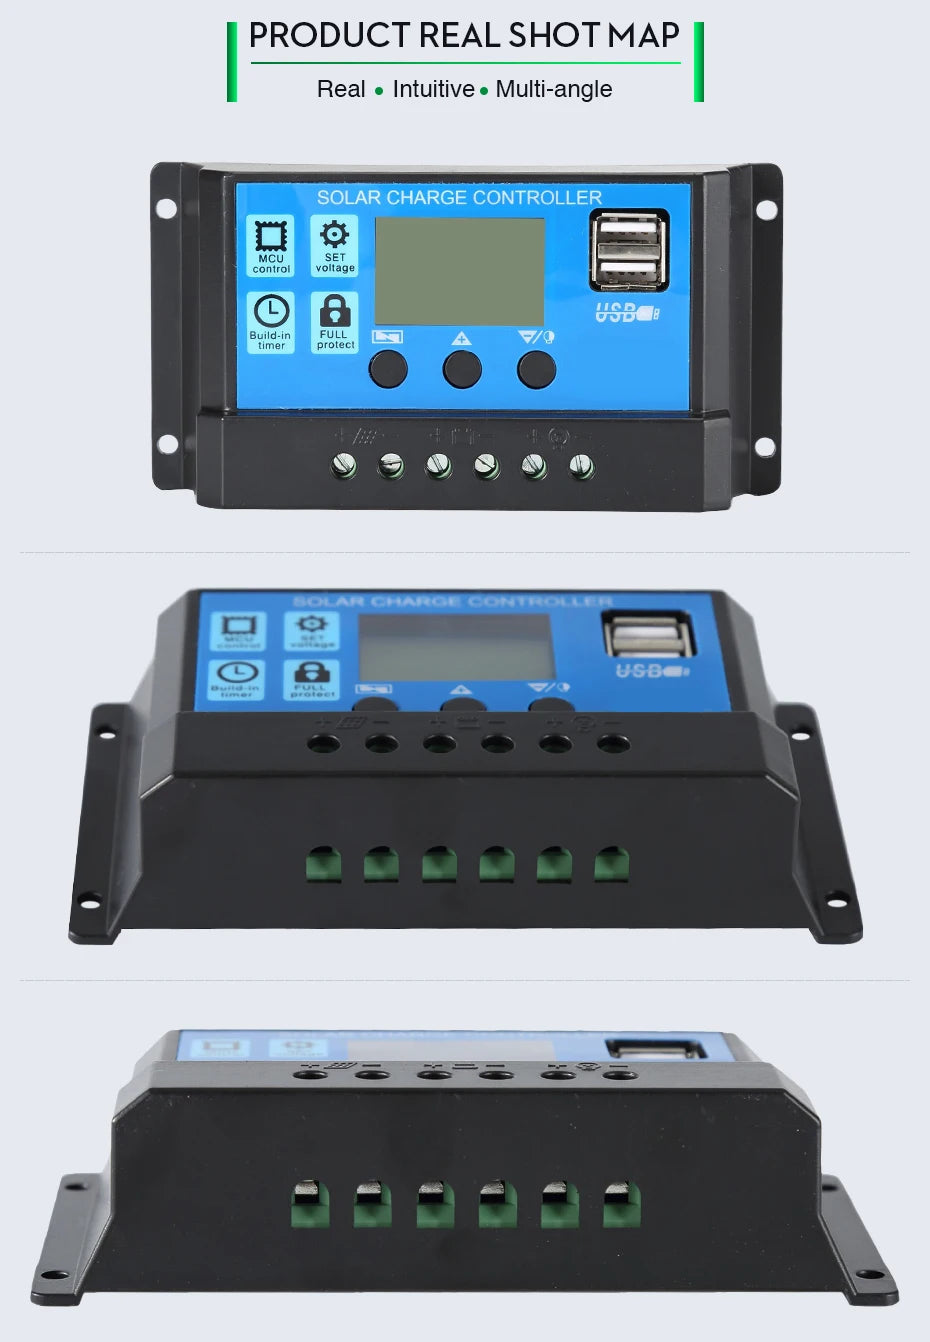 EASUN POWER Solar Controller, Solar controller with real-time monitoring, multiple angles, and full protection features, including overcharge/undervoltage protection and an LCD display.